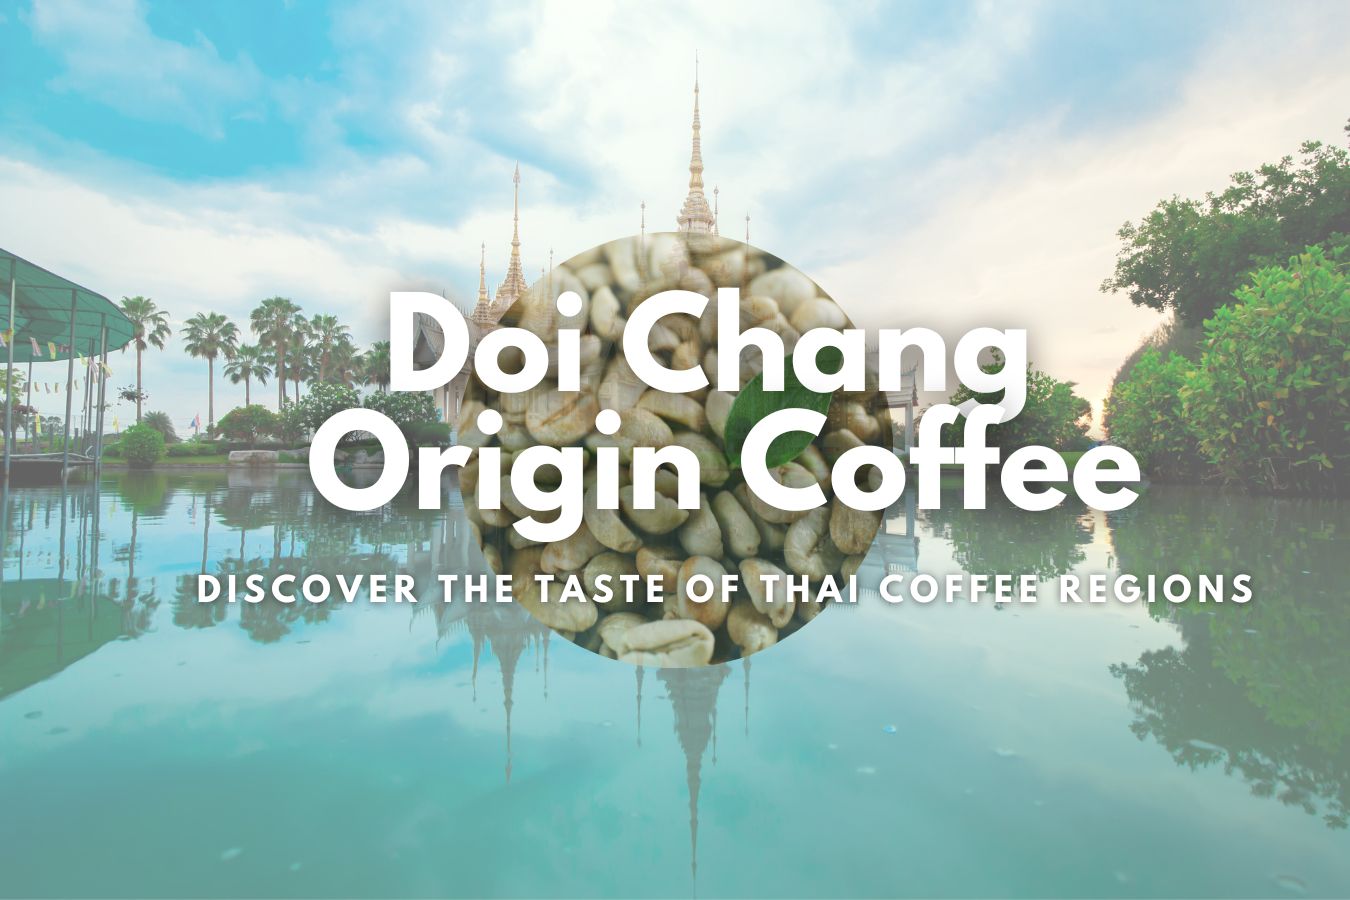 Journey to the Doi Chang Origin Coffee Discover the taste of Thai Coffee Regions